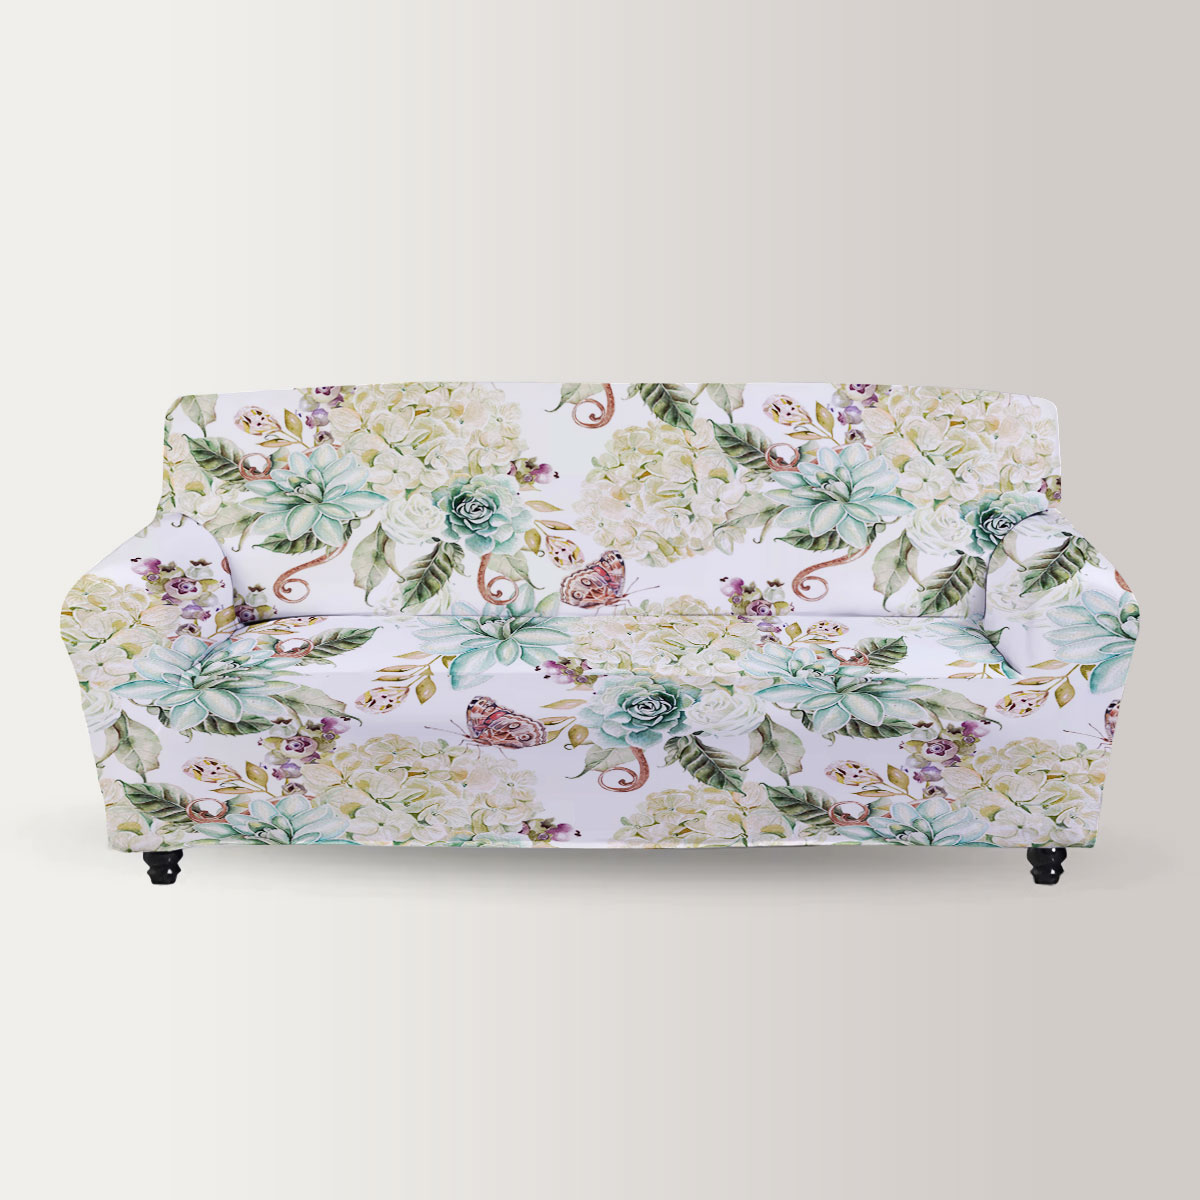 Bright Watercolor With Flowers Hydrangea, Rose And Succulents Sofa Cover